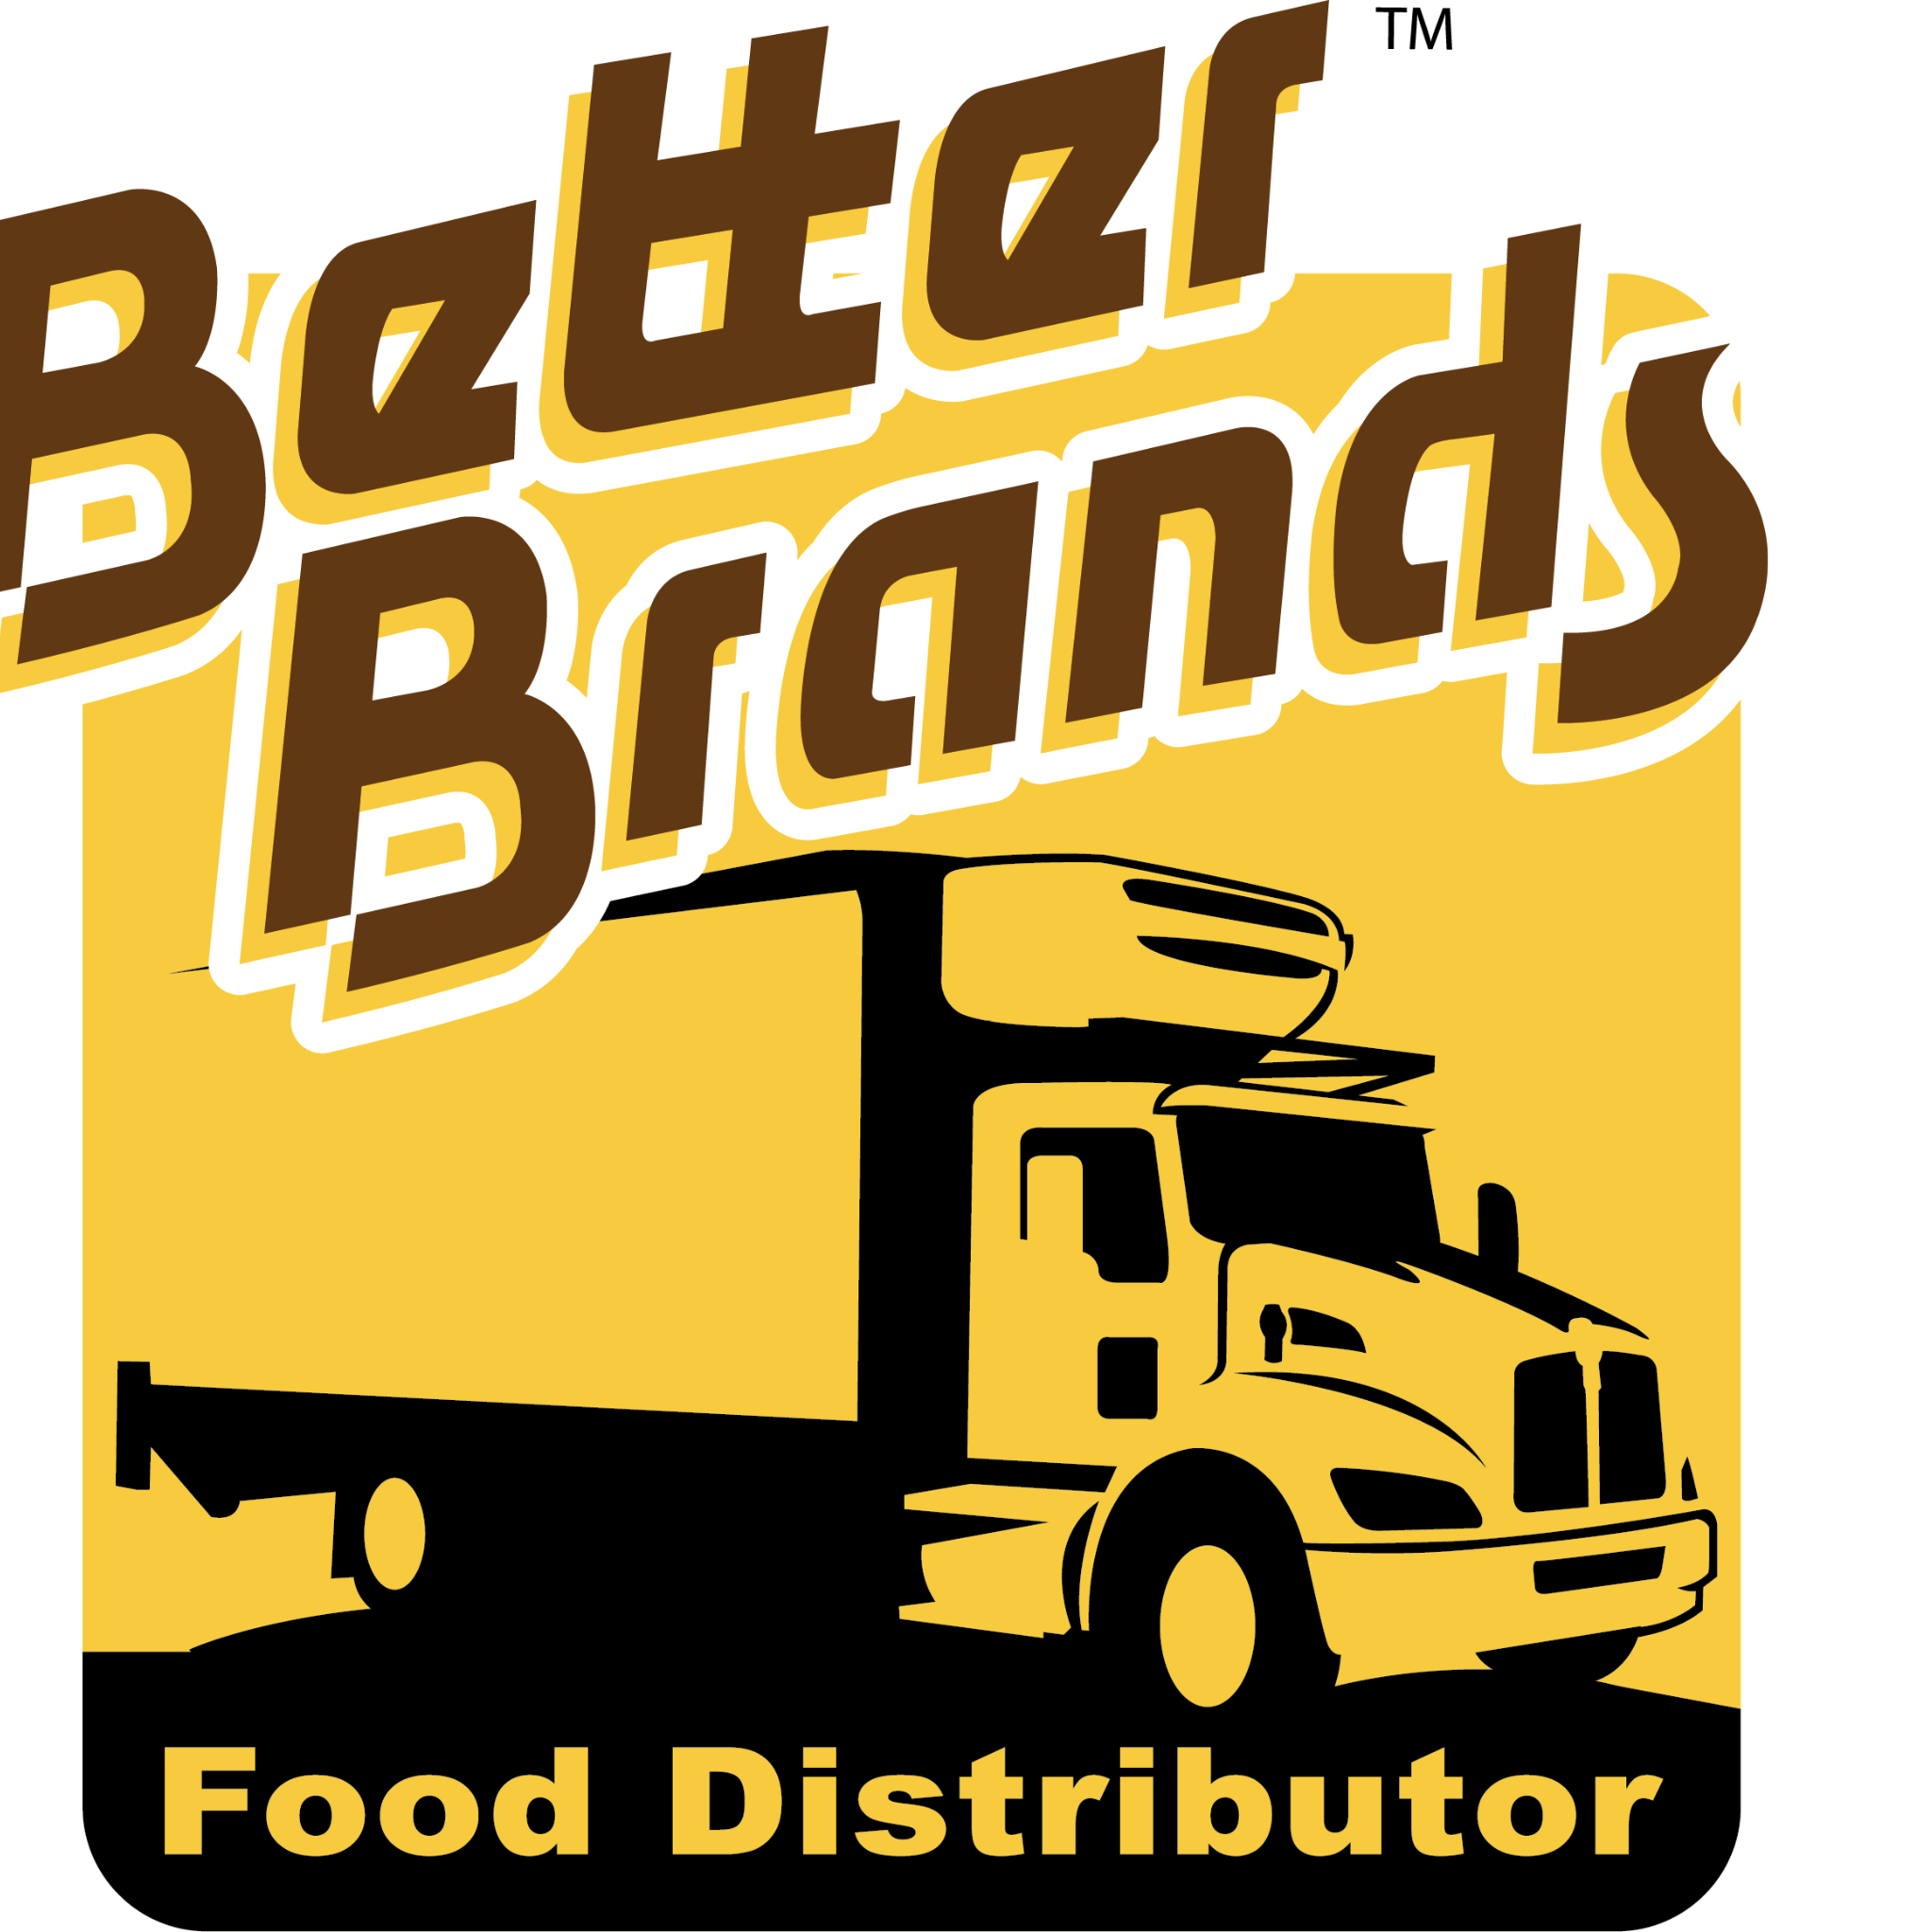 https://www.betterbrandfoods.com/files/bbf-logo-with-see-threw-background-3.png